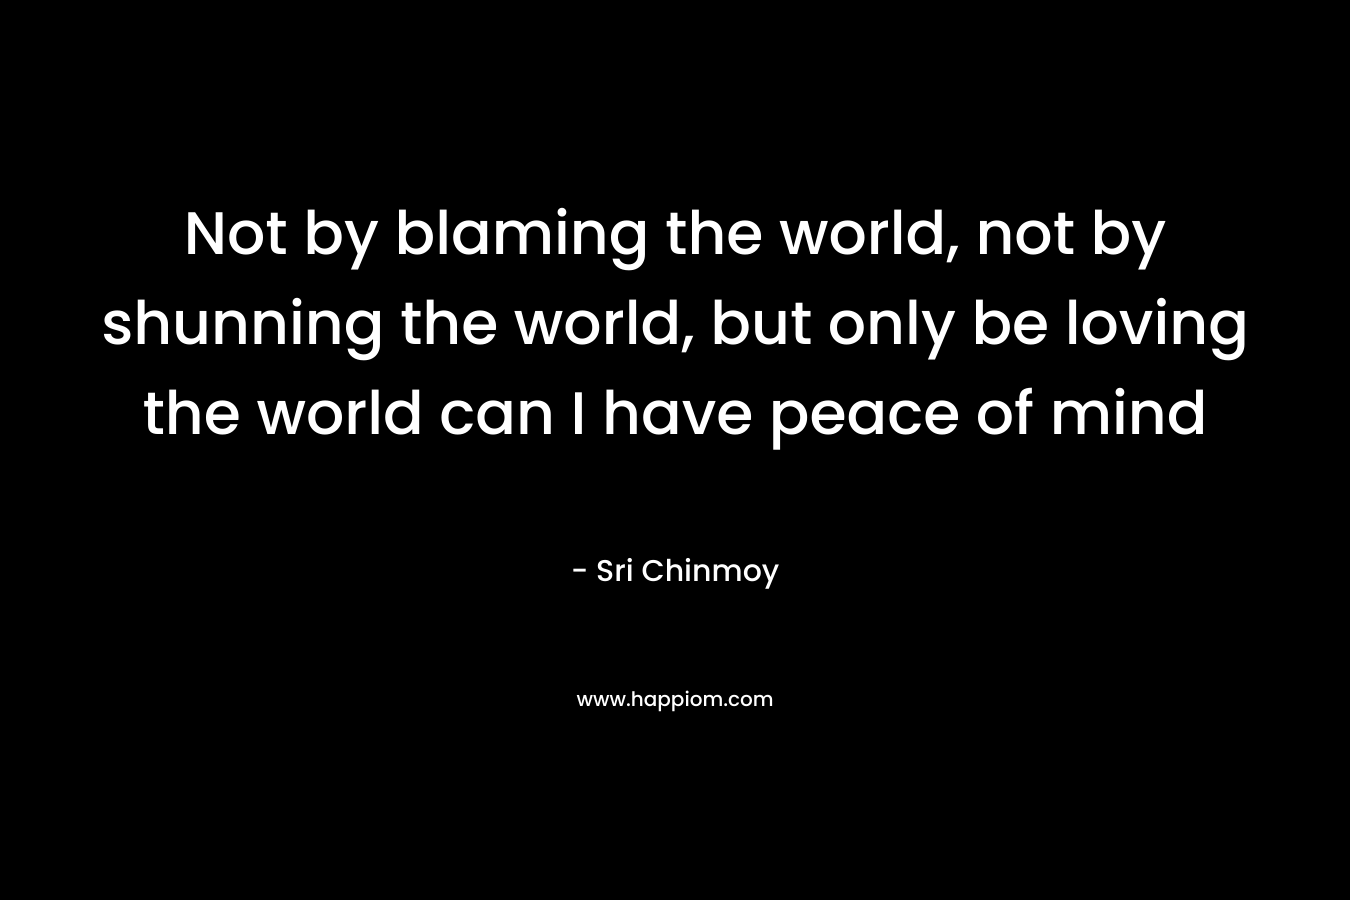 Not by blaming the world, not by shunning the world, but only be loving the world can I have peace of mind